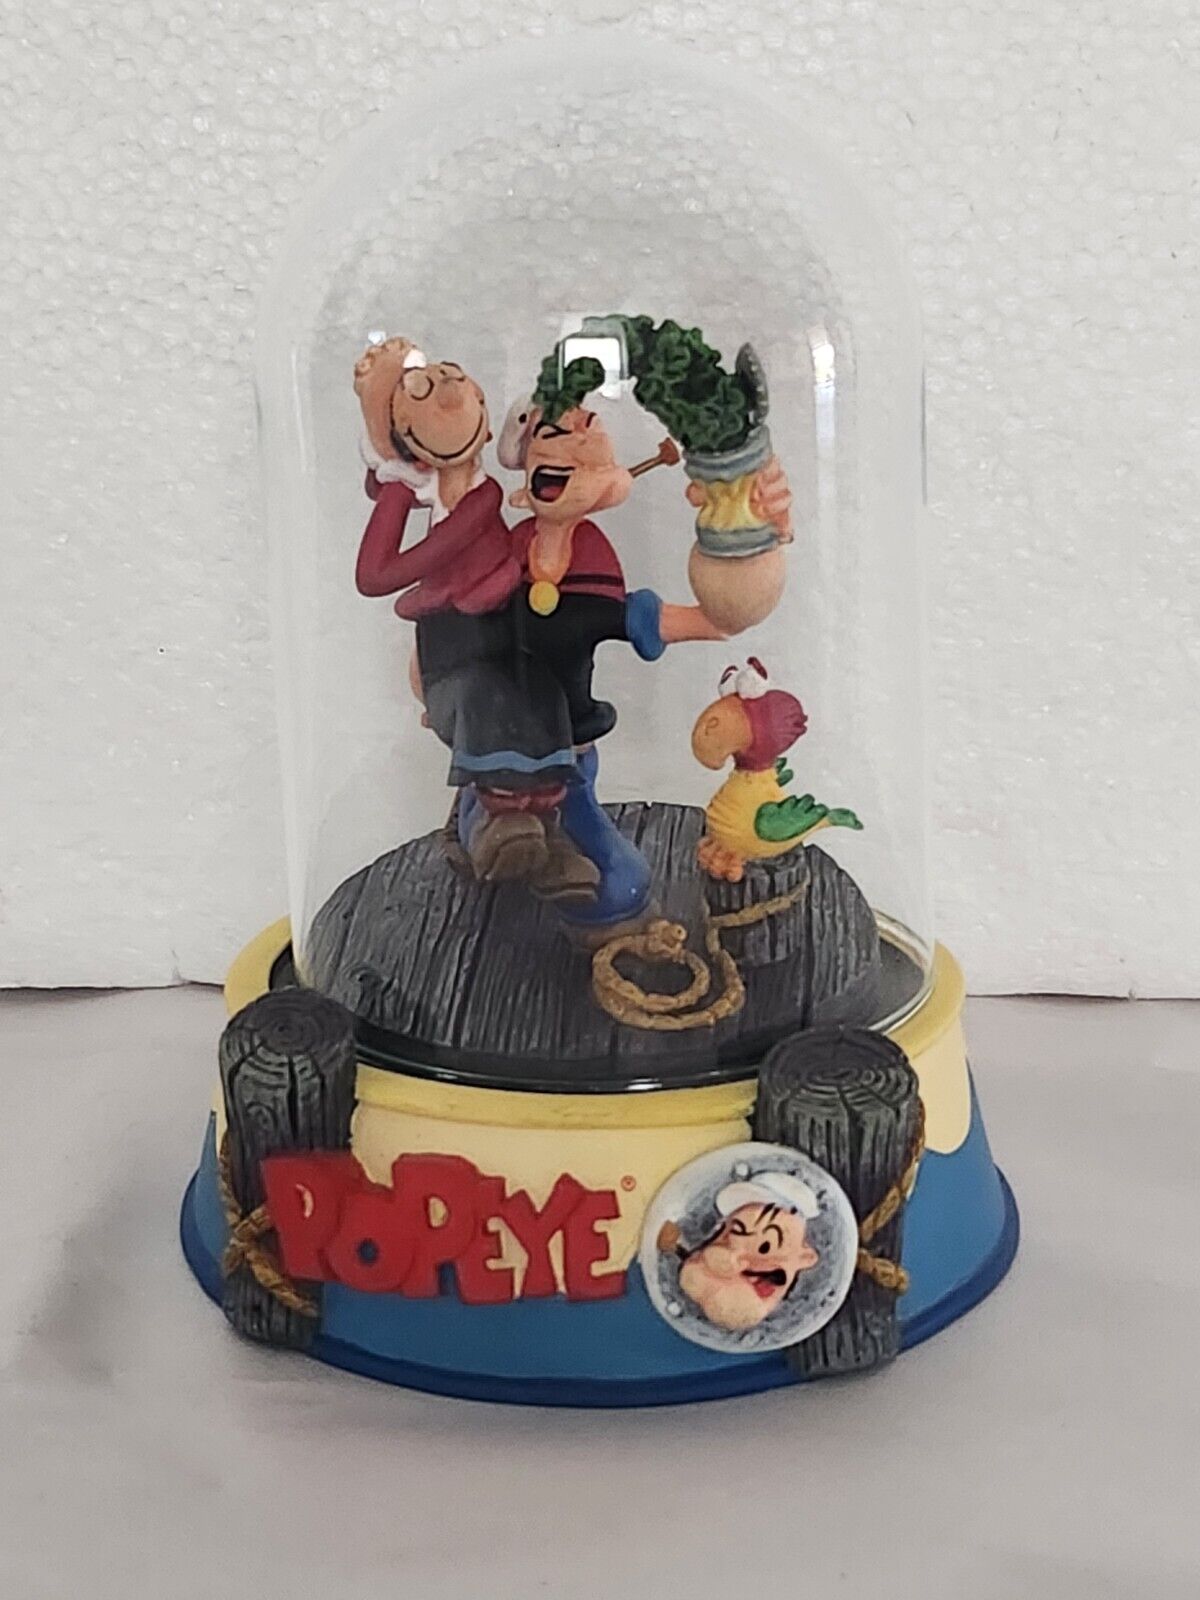 Vintage Franklin Mint Popeye the Sailor Man Under Glass Dome Limited Edition